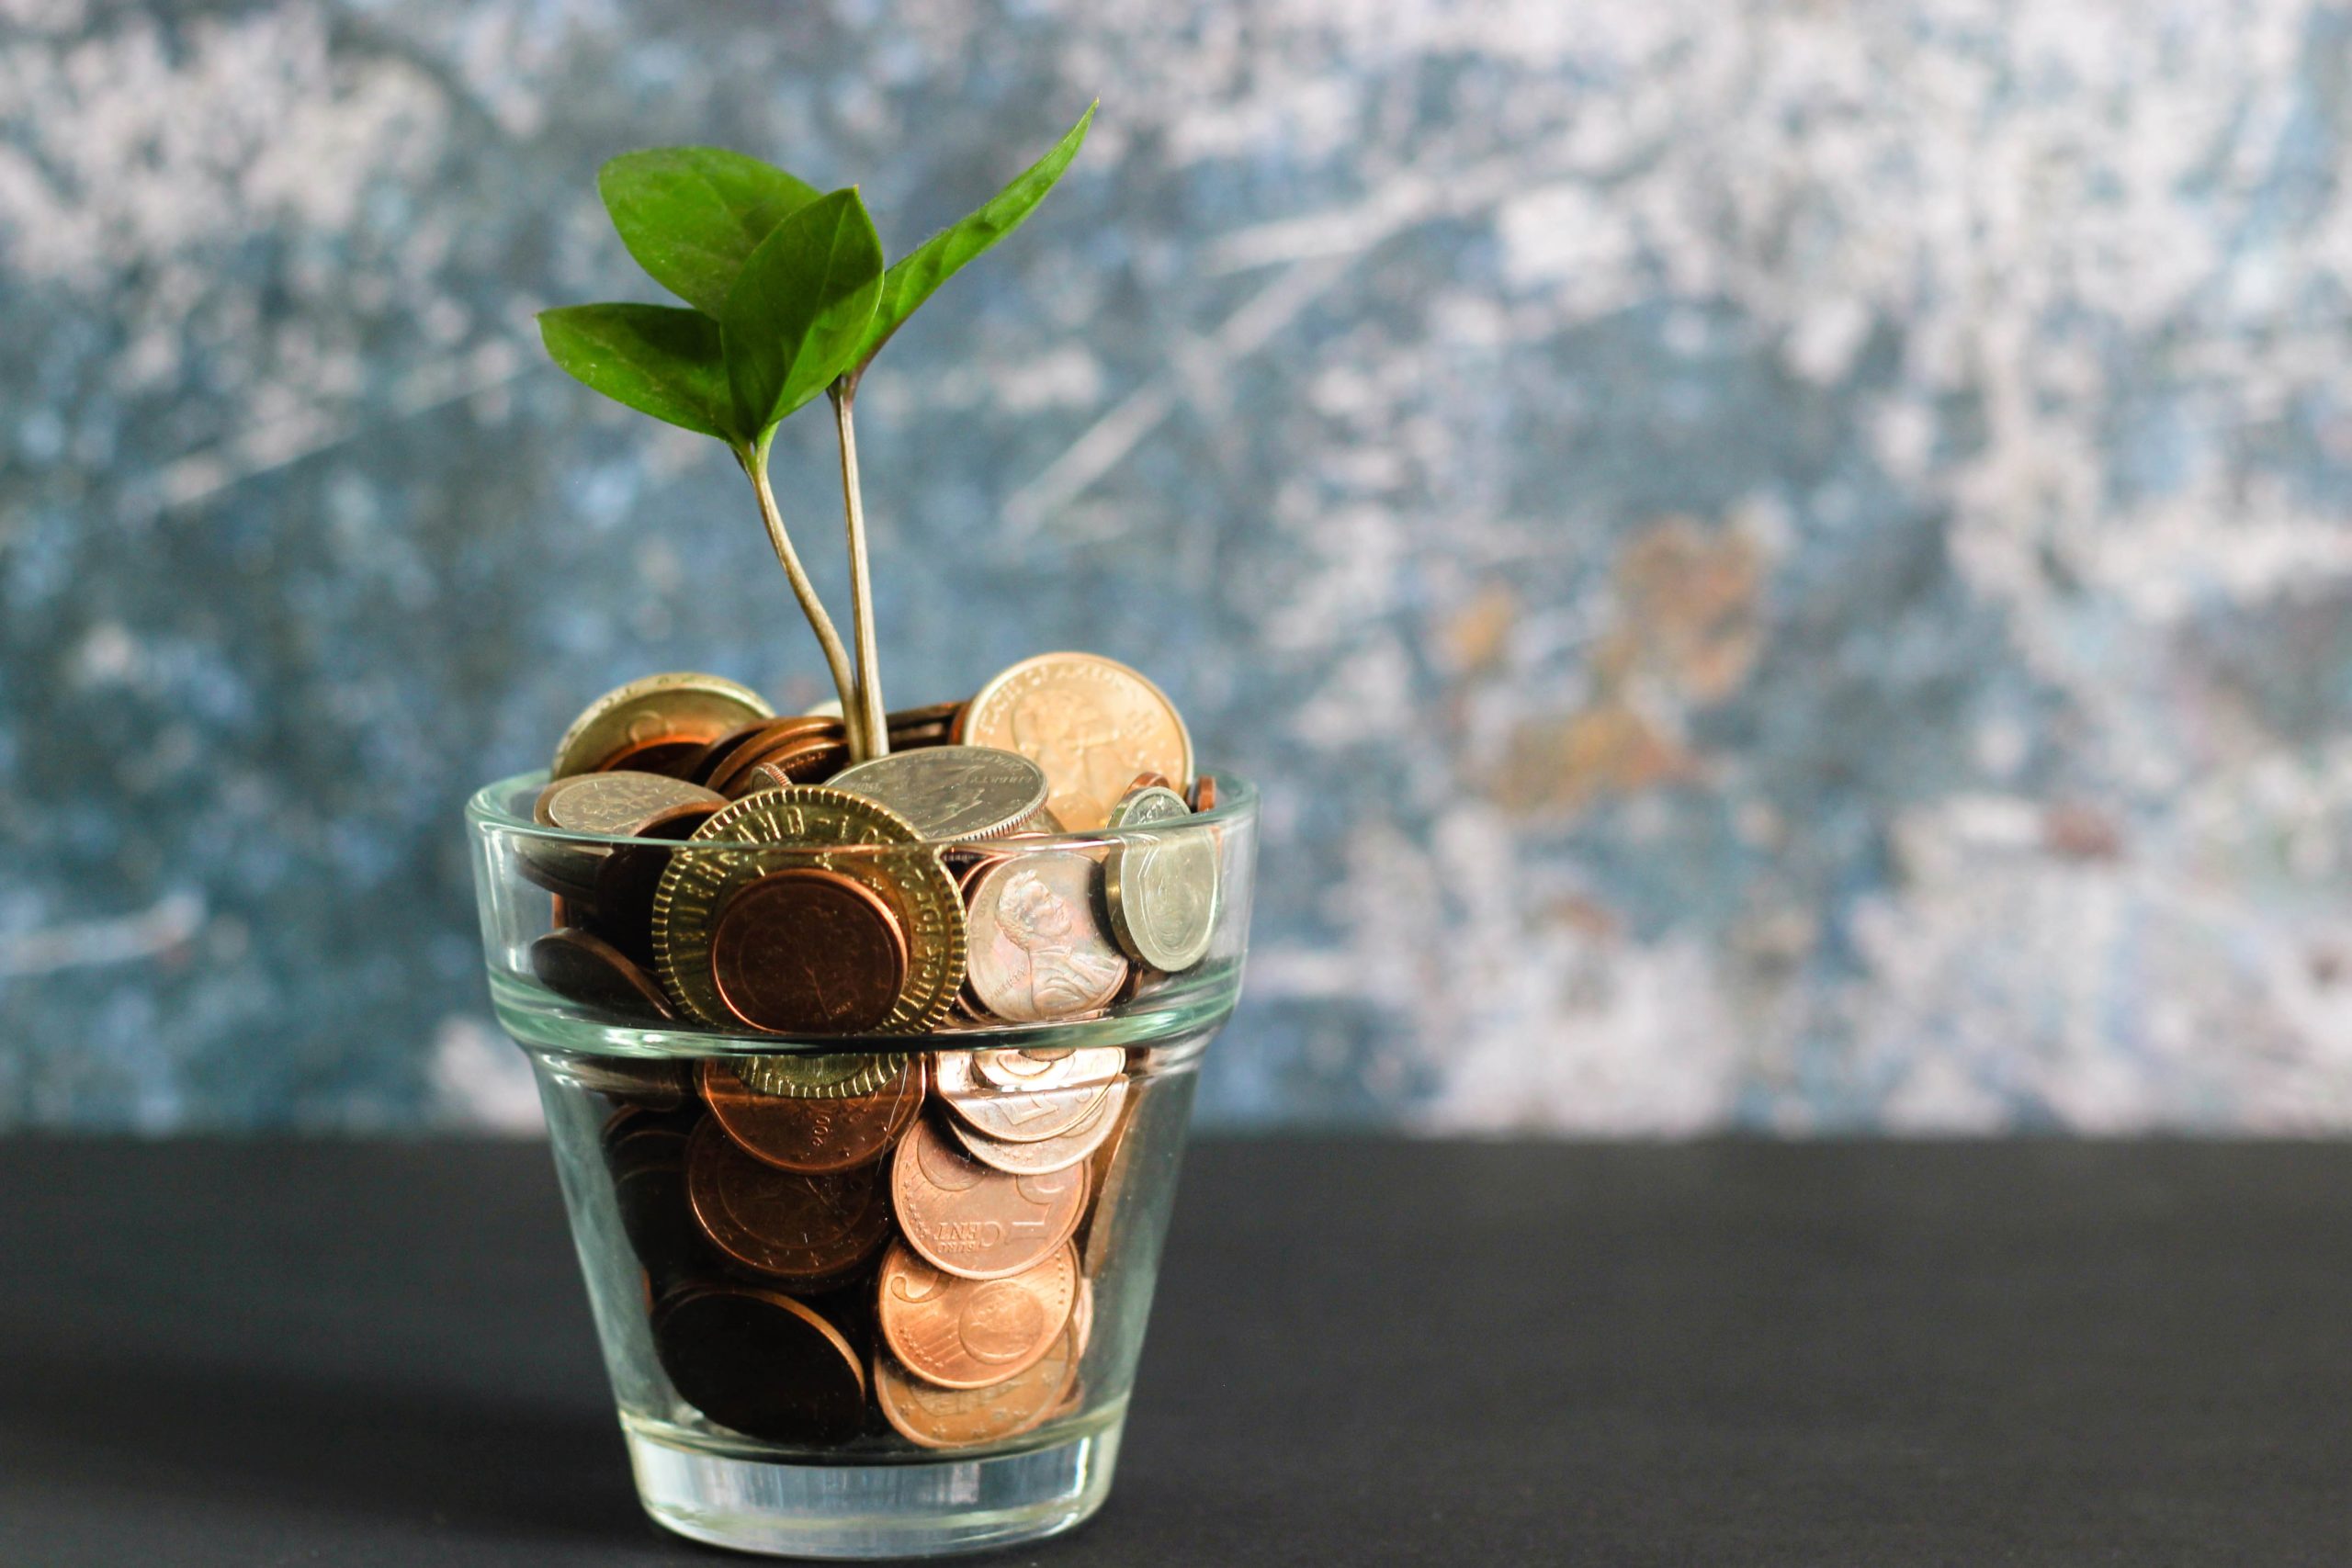 loose change in a small glass planter with plant